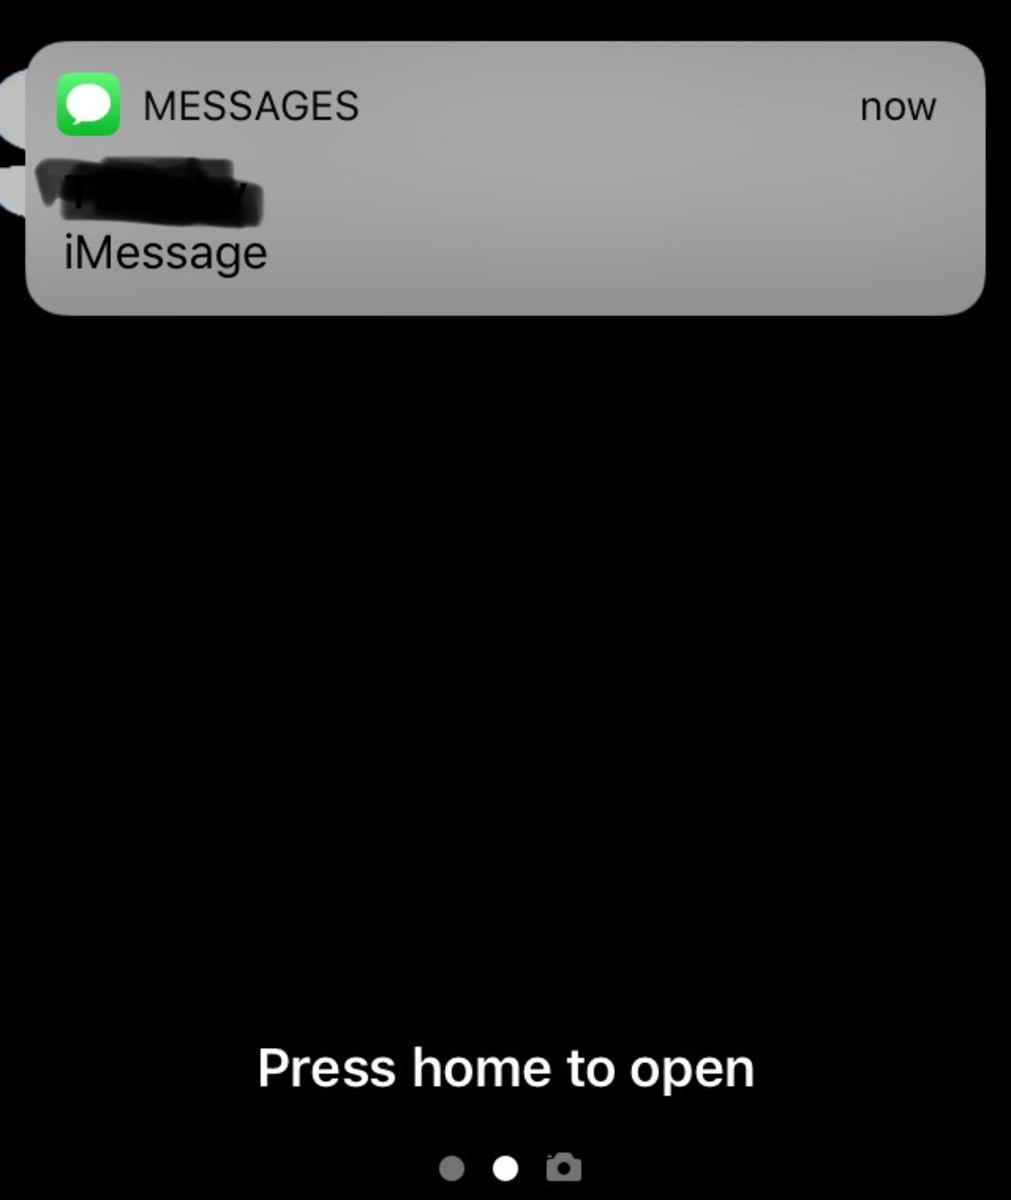 Then your message notification will show up as a generic text notification on your home screen.